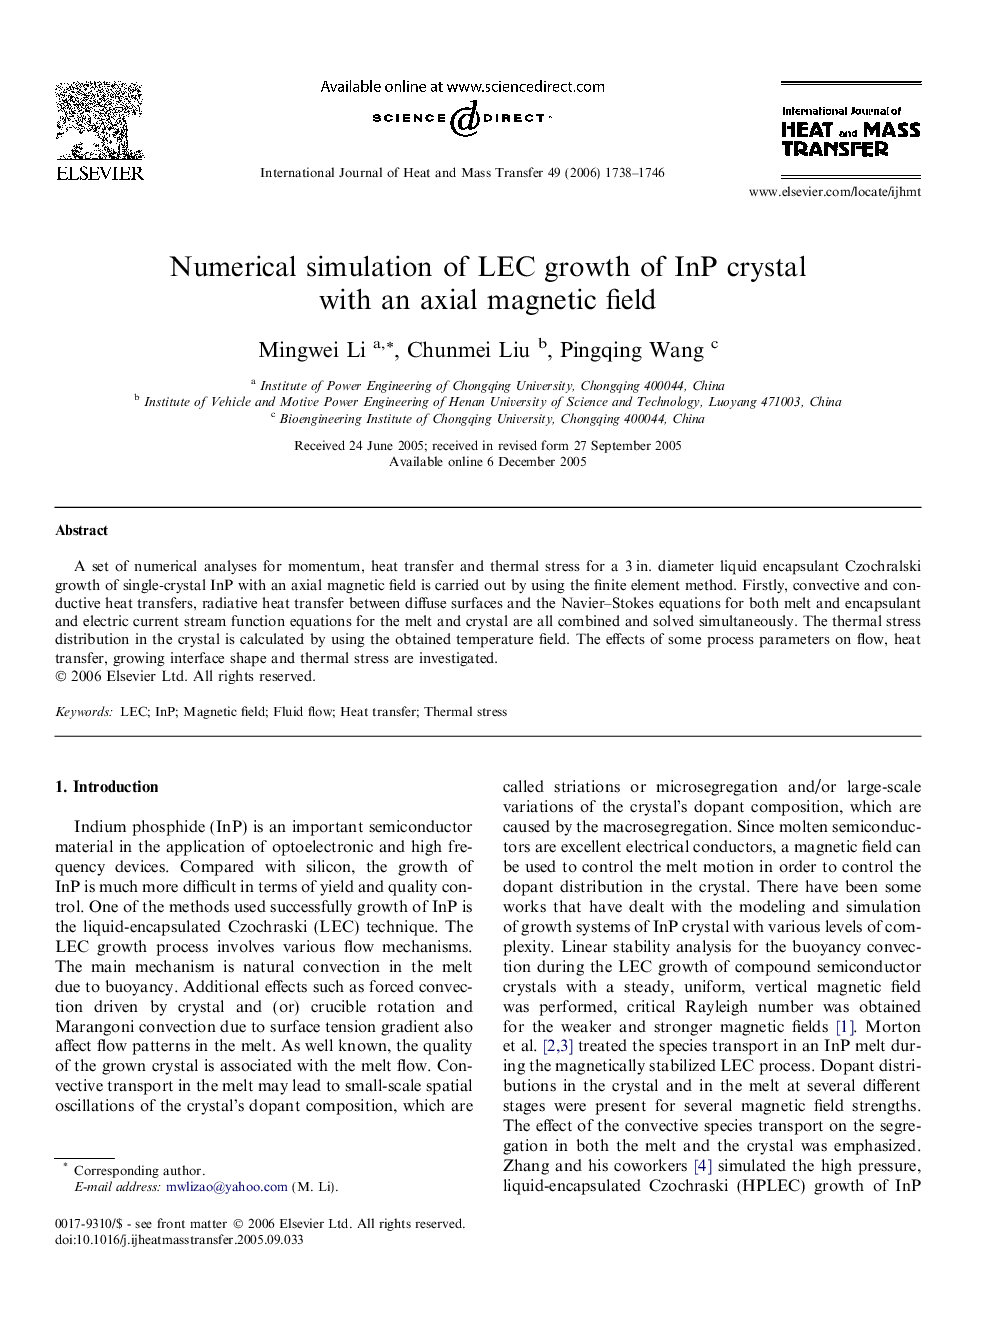 Numerical simulation of LEC growth of InP crystal with an axial magnetic field